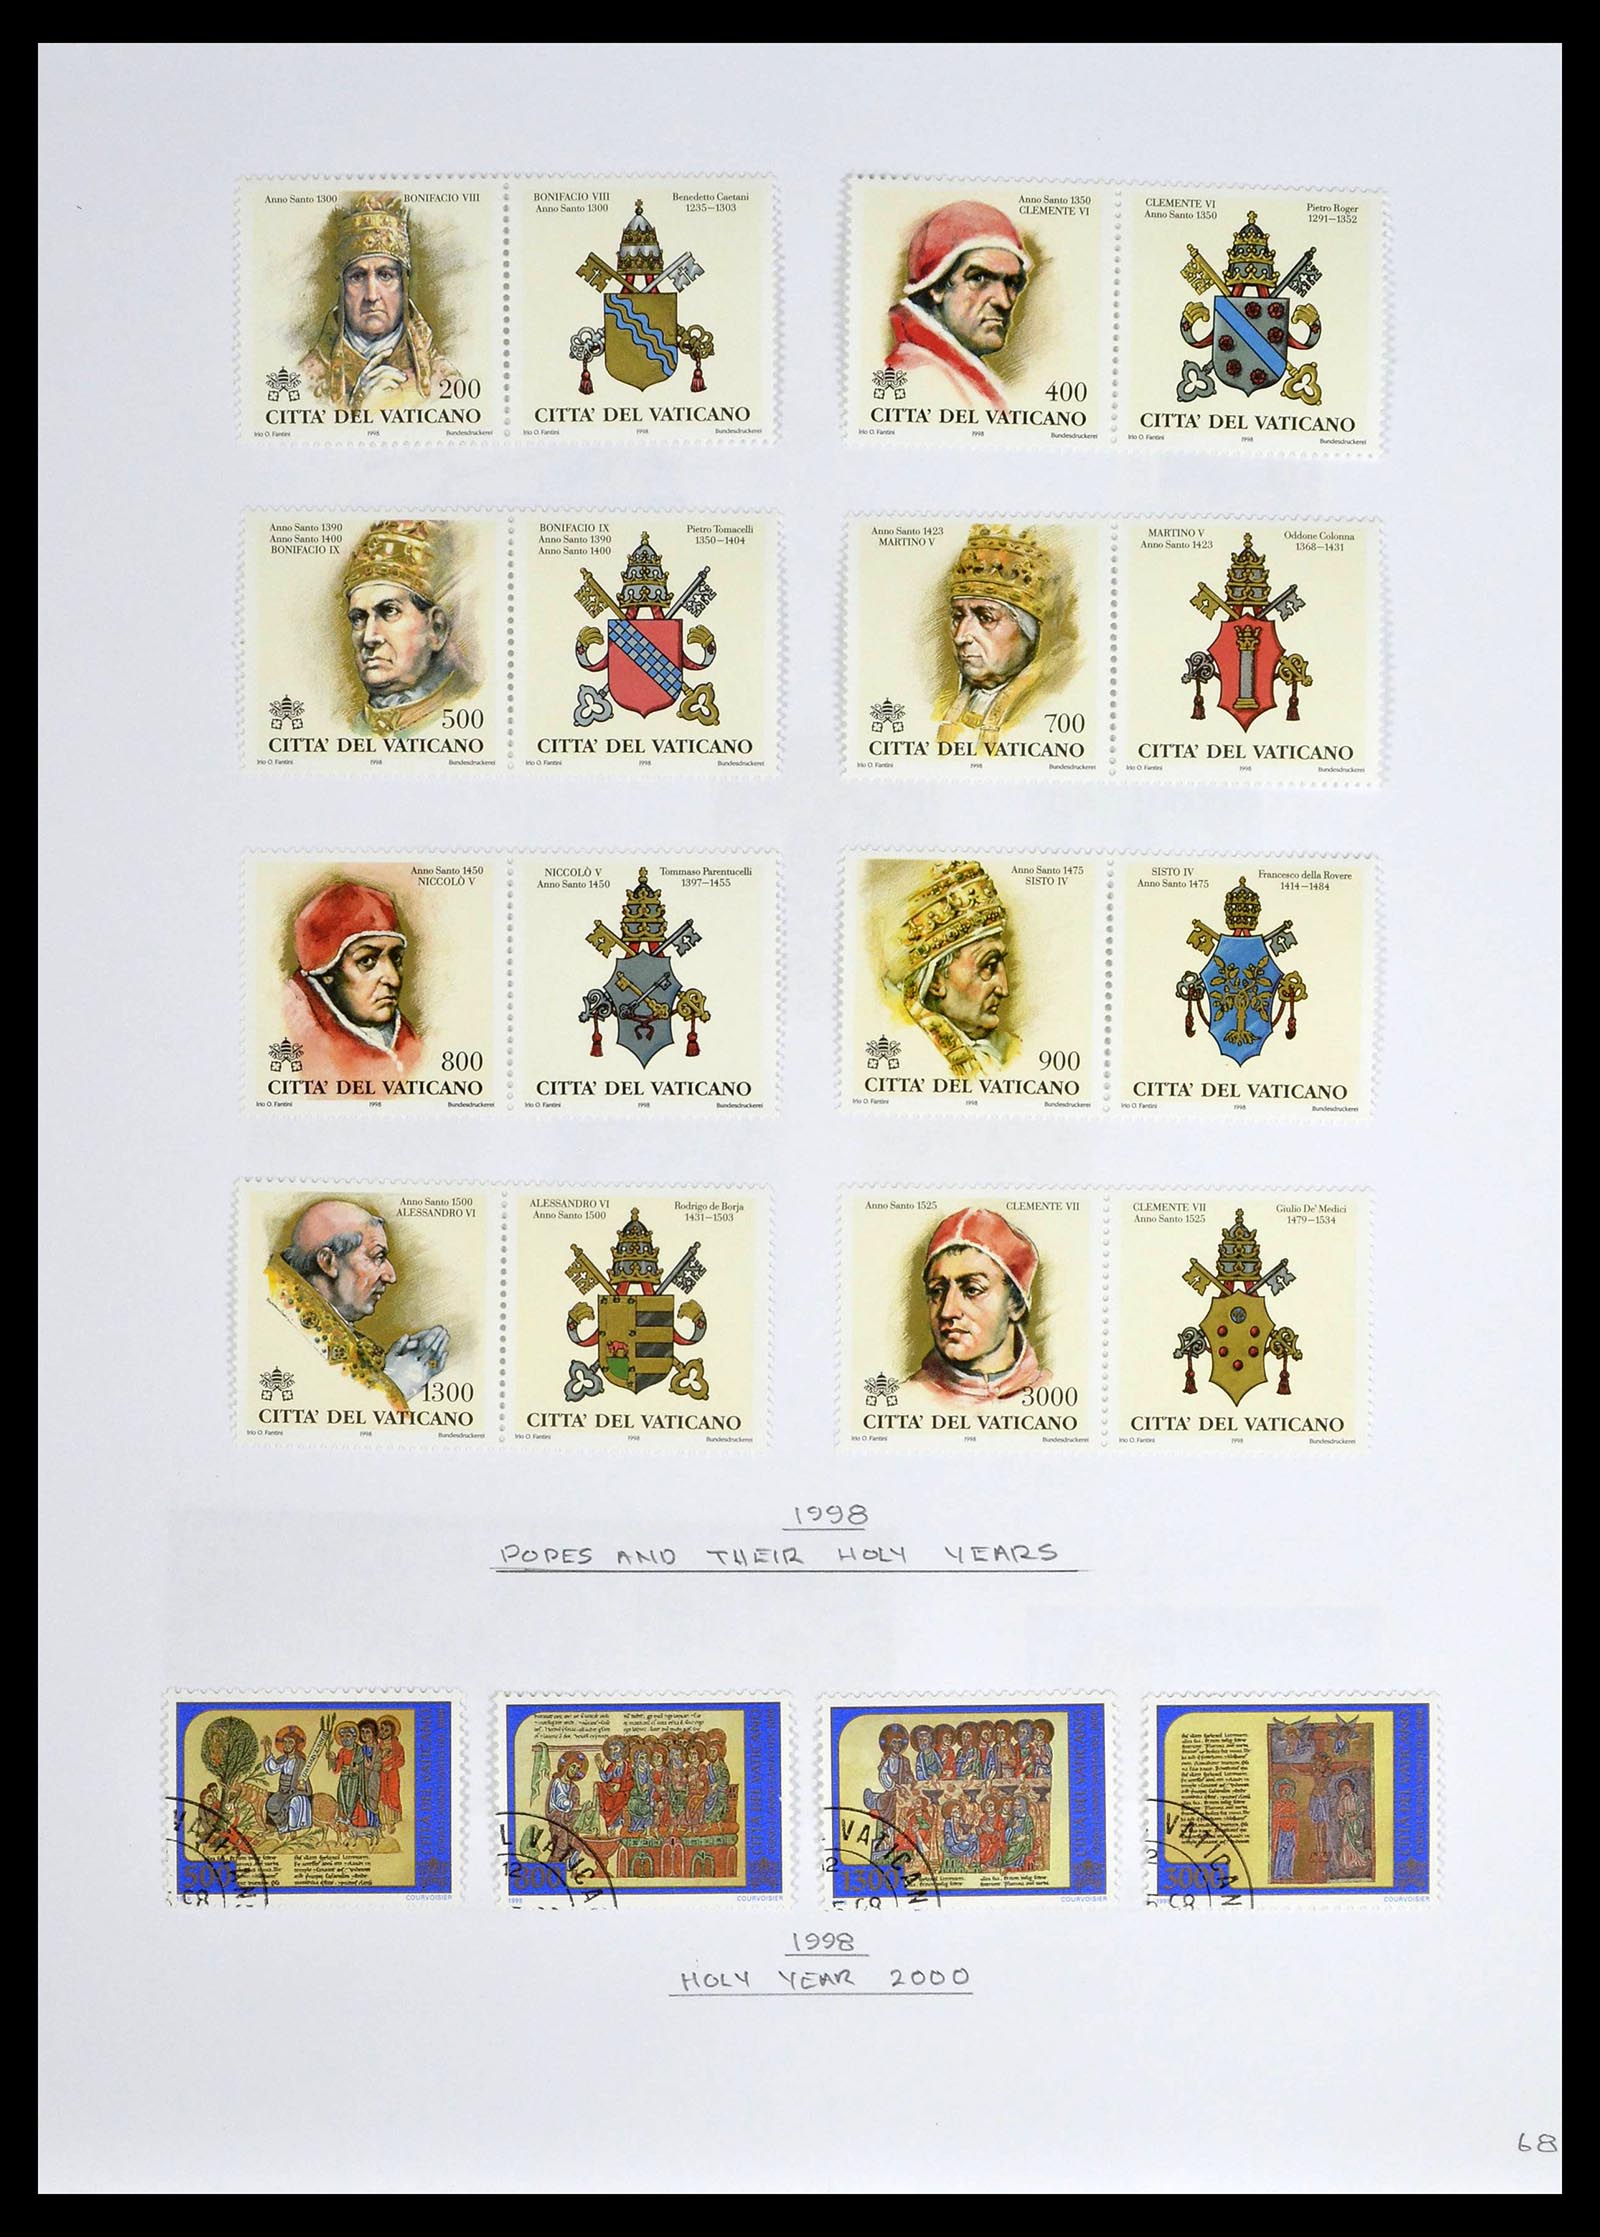 39099 0070 - Stamp collection 39099 Vatican 1852-2008.